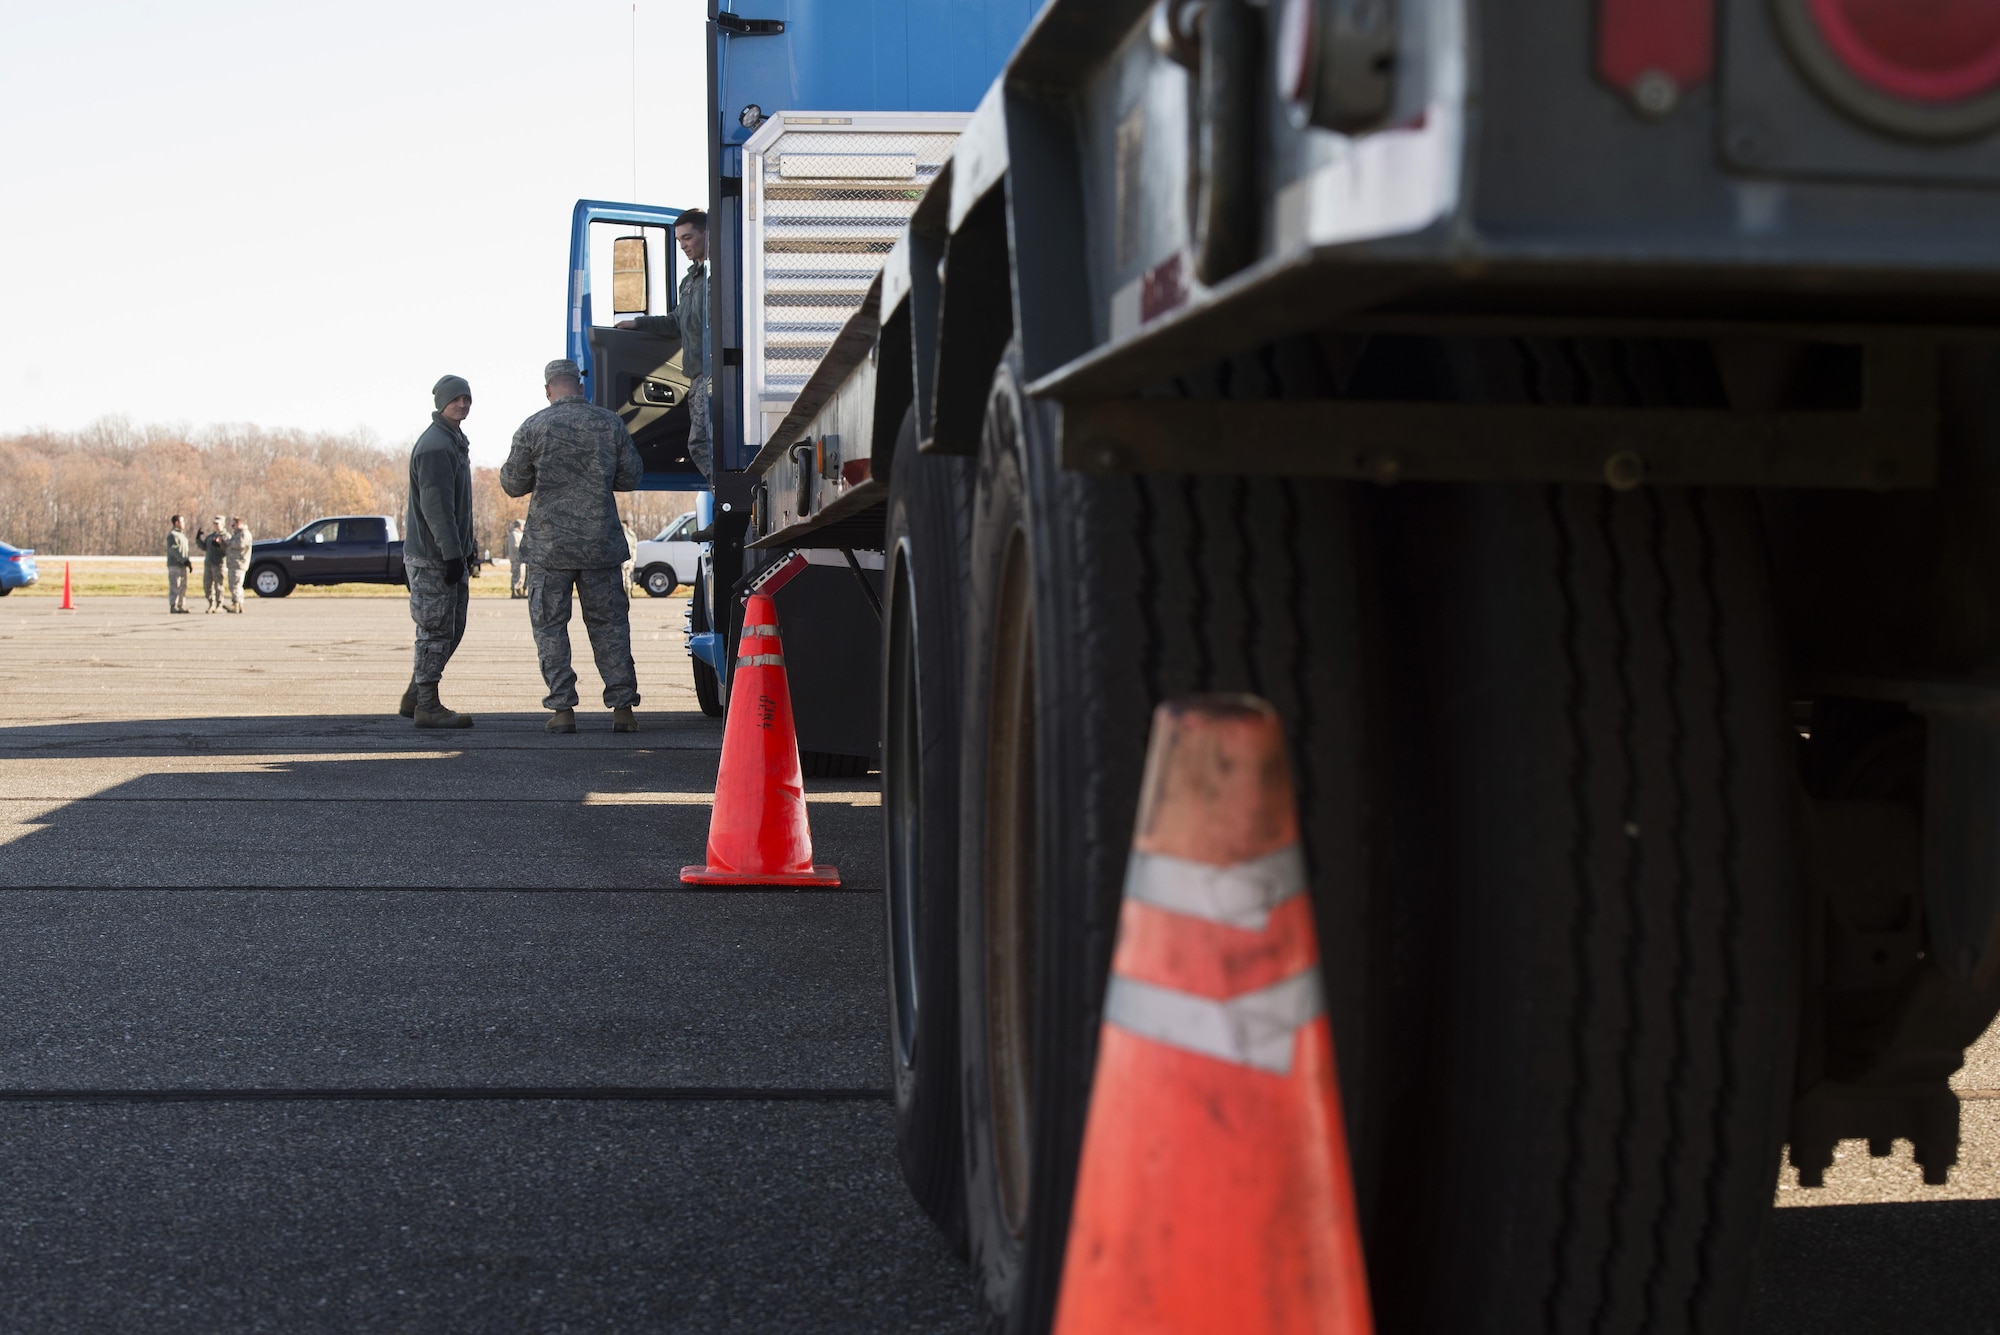 A tractor trailer is parked parallel between cones while vehicle operations Airmen discuss maneuver execution during the ground transportation rodeo at Dover Air Force Base, Del. Airmen from the 87th Logistics Readiness Squadron traveled from Joint Base McGuire-Dix-Lakehurst to participate in the event with Team Dover’s 436th LRS. (U.S. Air Force photo by Senior Airman Aaron J. Jenne)